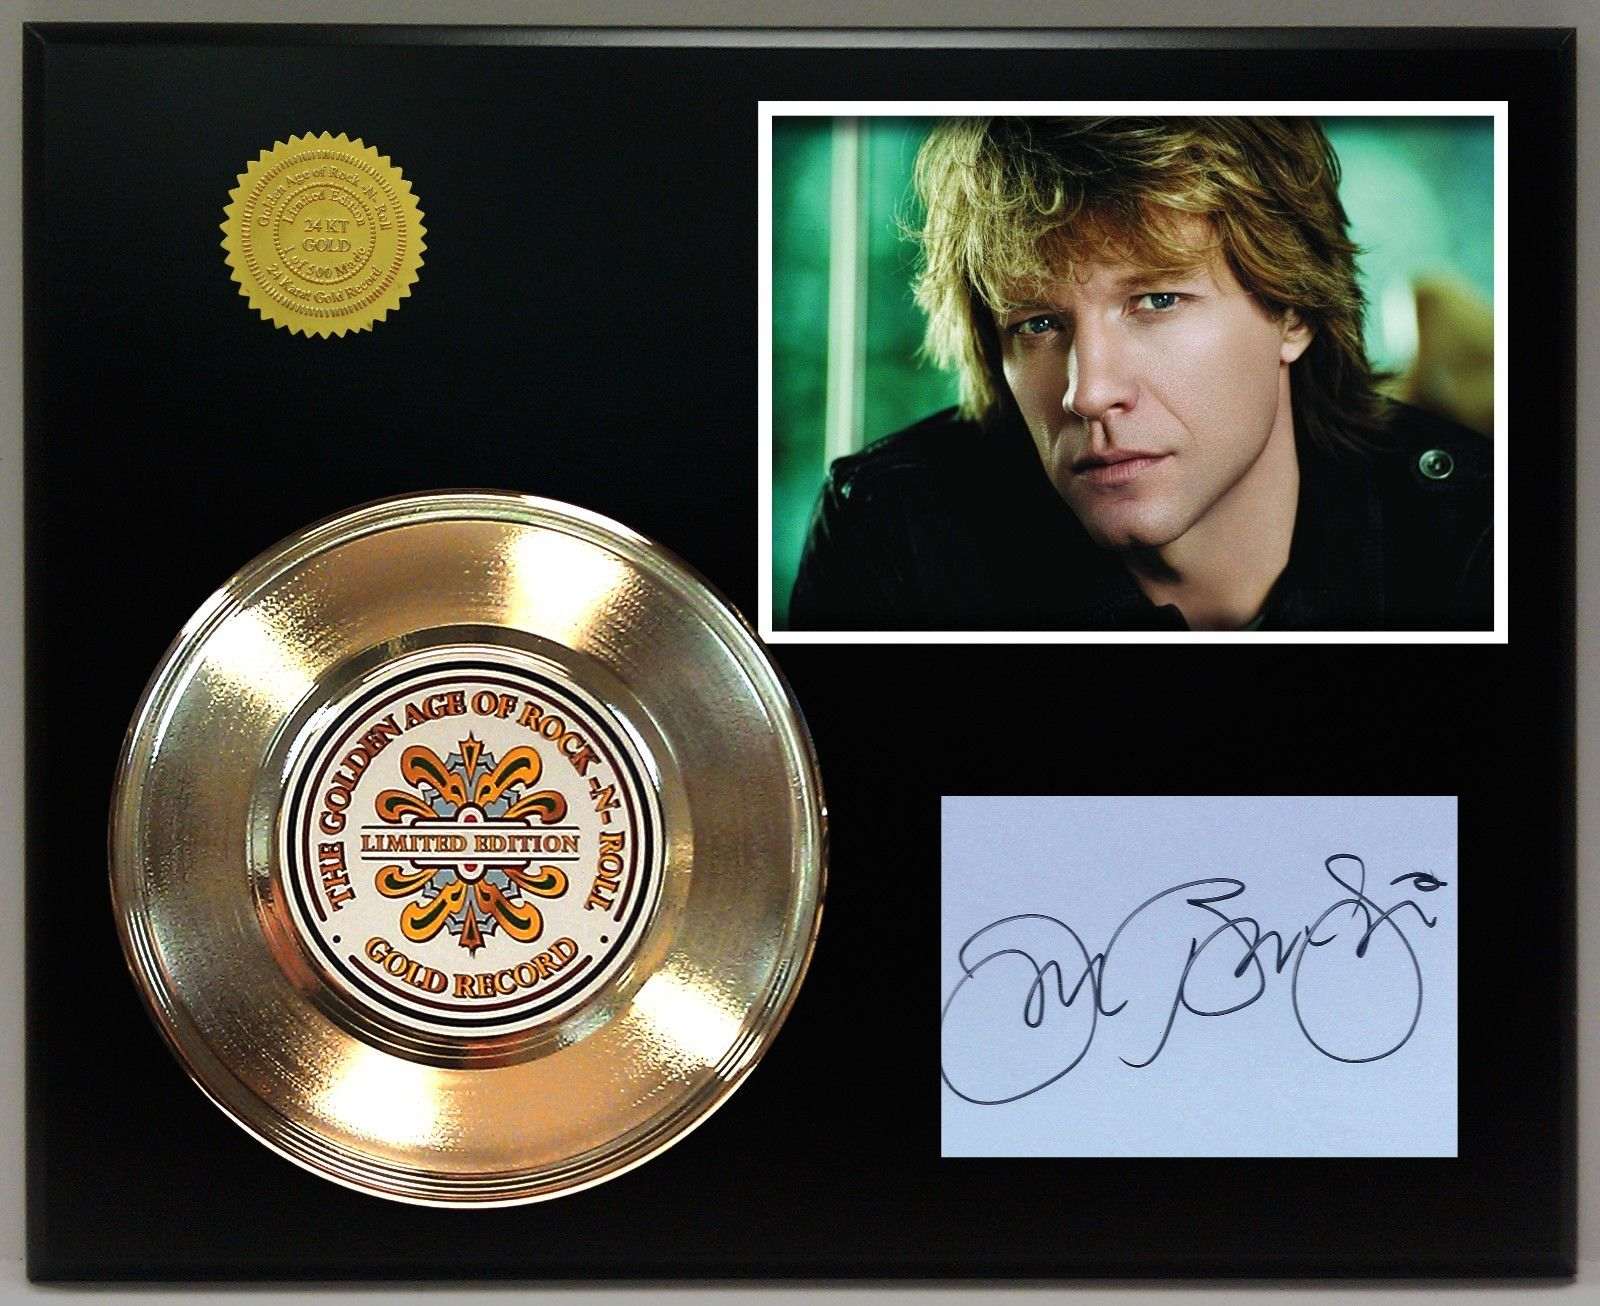 Bon Jovi These Days Collectors Ltd Edition-AutographedSigned Album Cover & Gold Vinyl CD Record *Professionally Mounted And Framed*